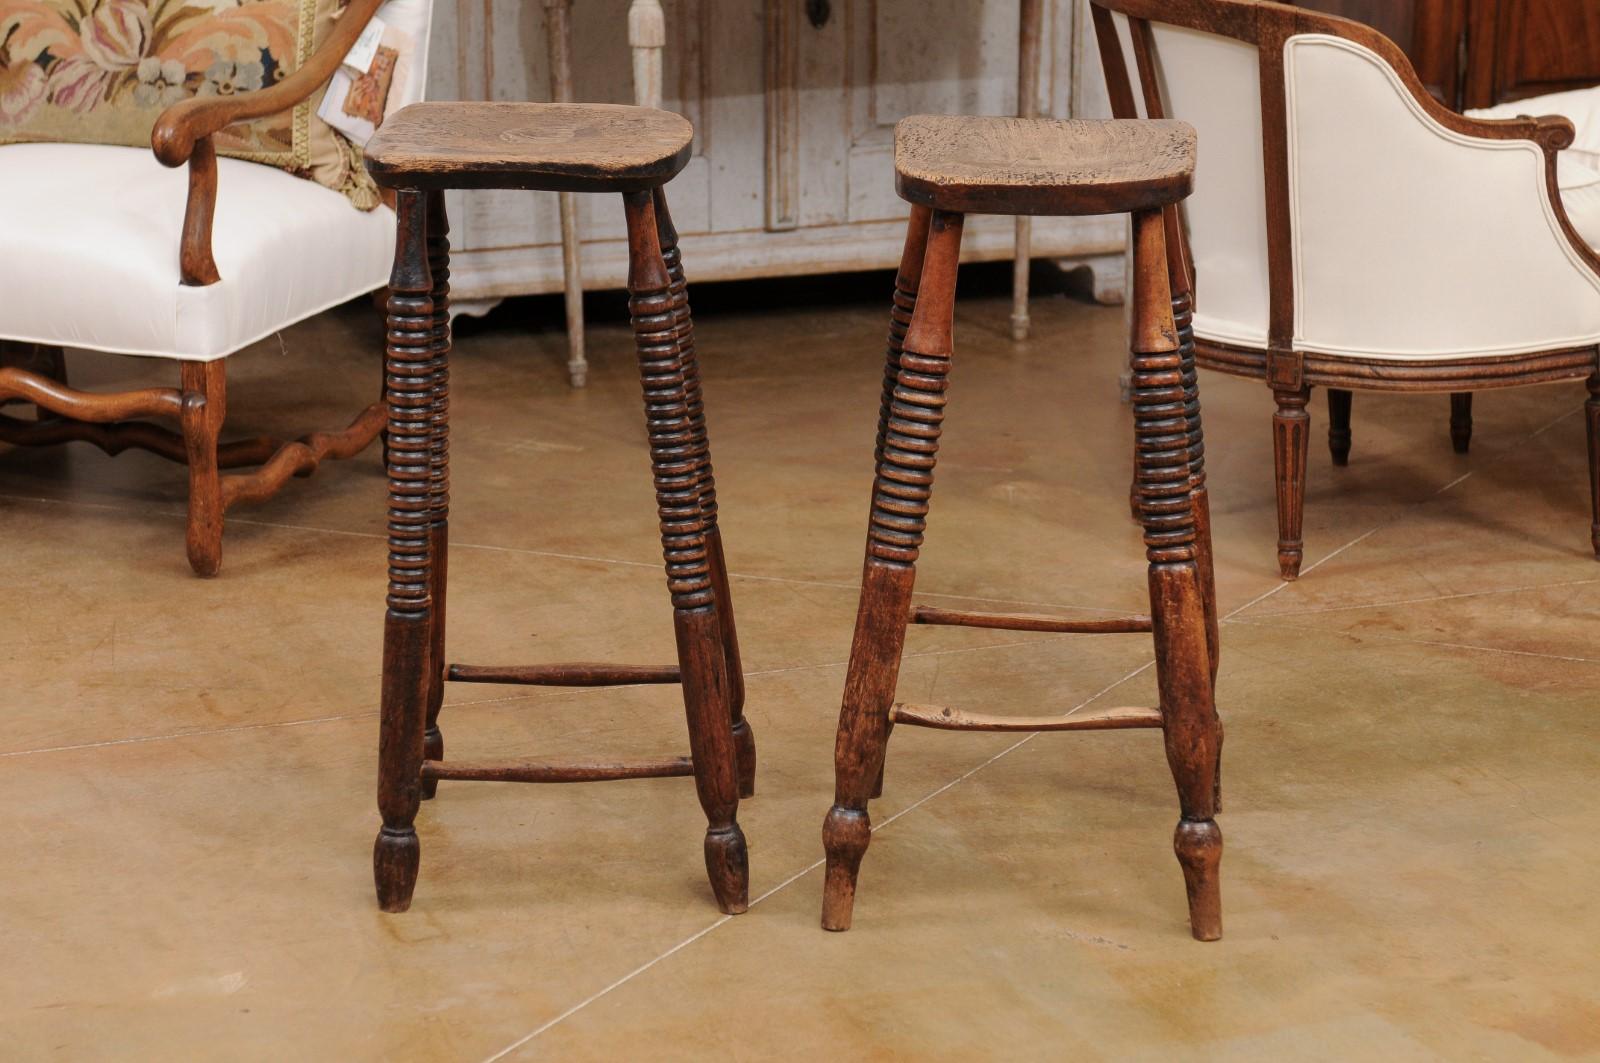 19th Century Pair of 1870s French Wooden Bar Stools with Spool Legs and Weathered Patina